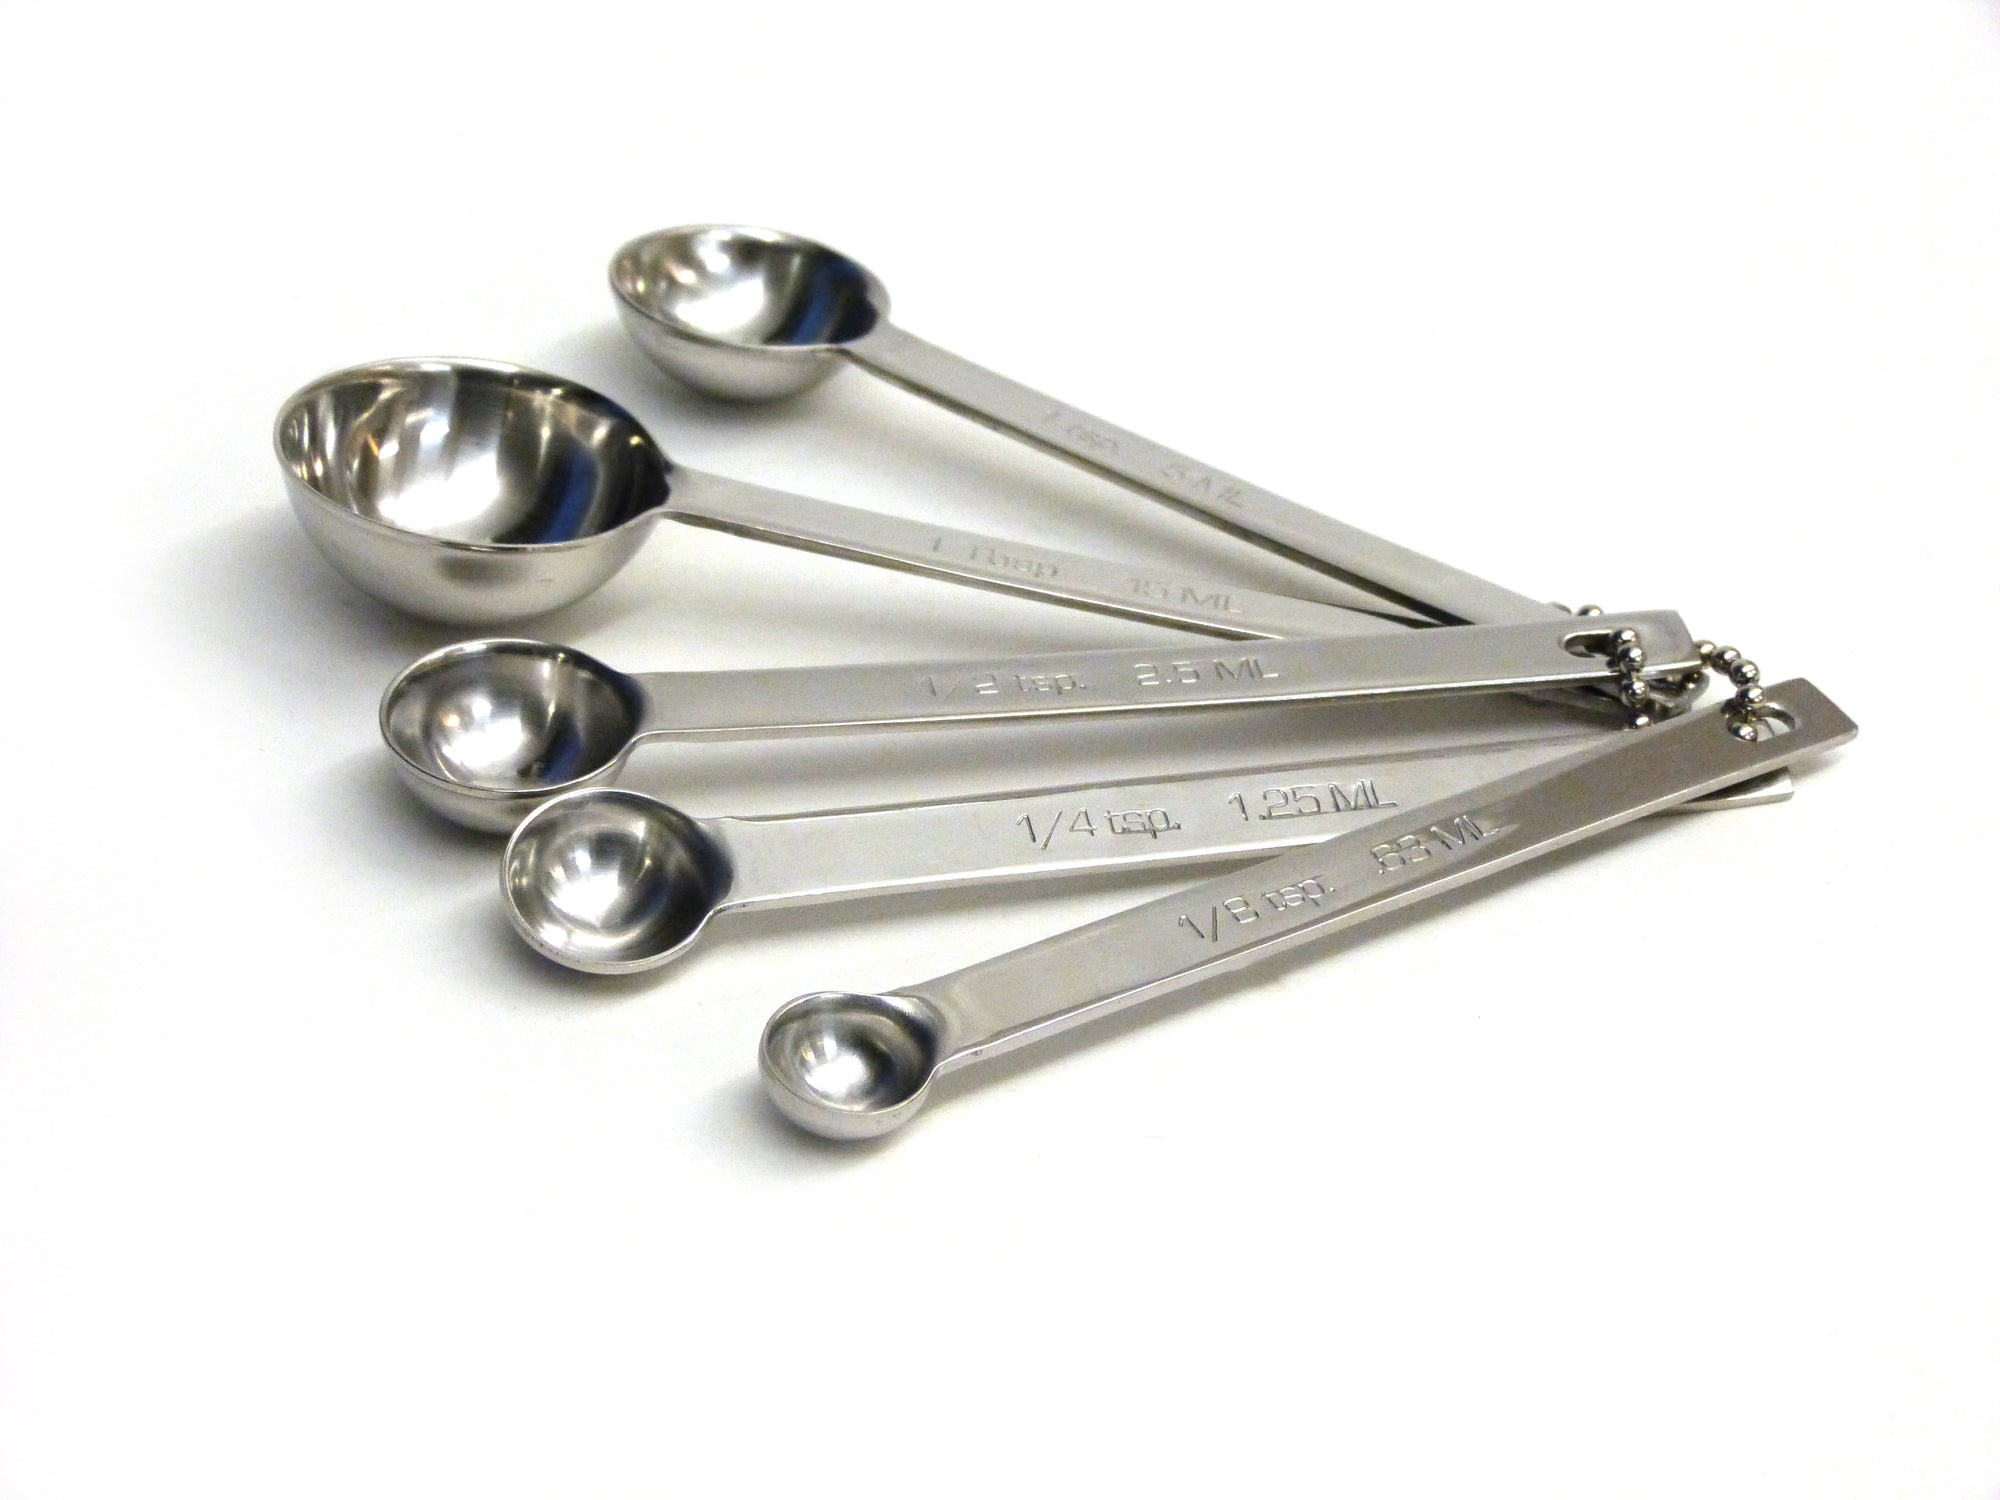 Chef's Series, Heavy Duty Gauge Stainless Spice Measuring Spoons